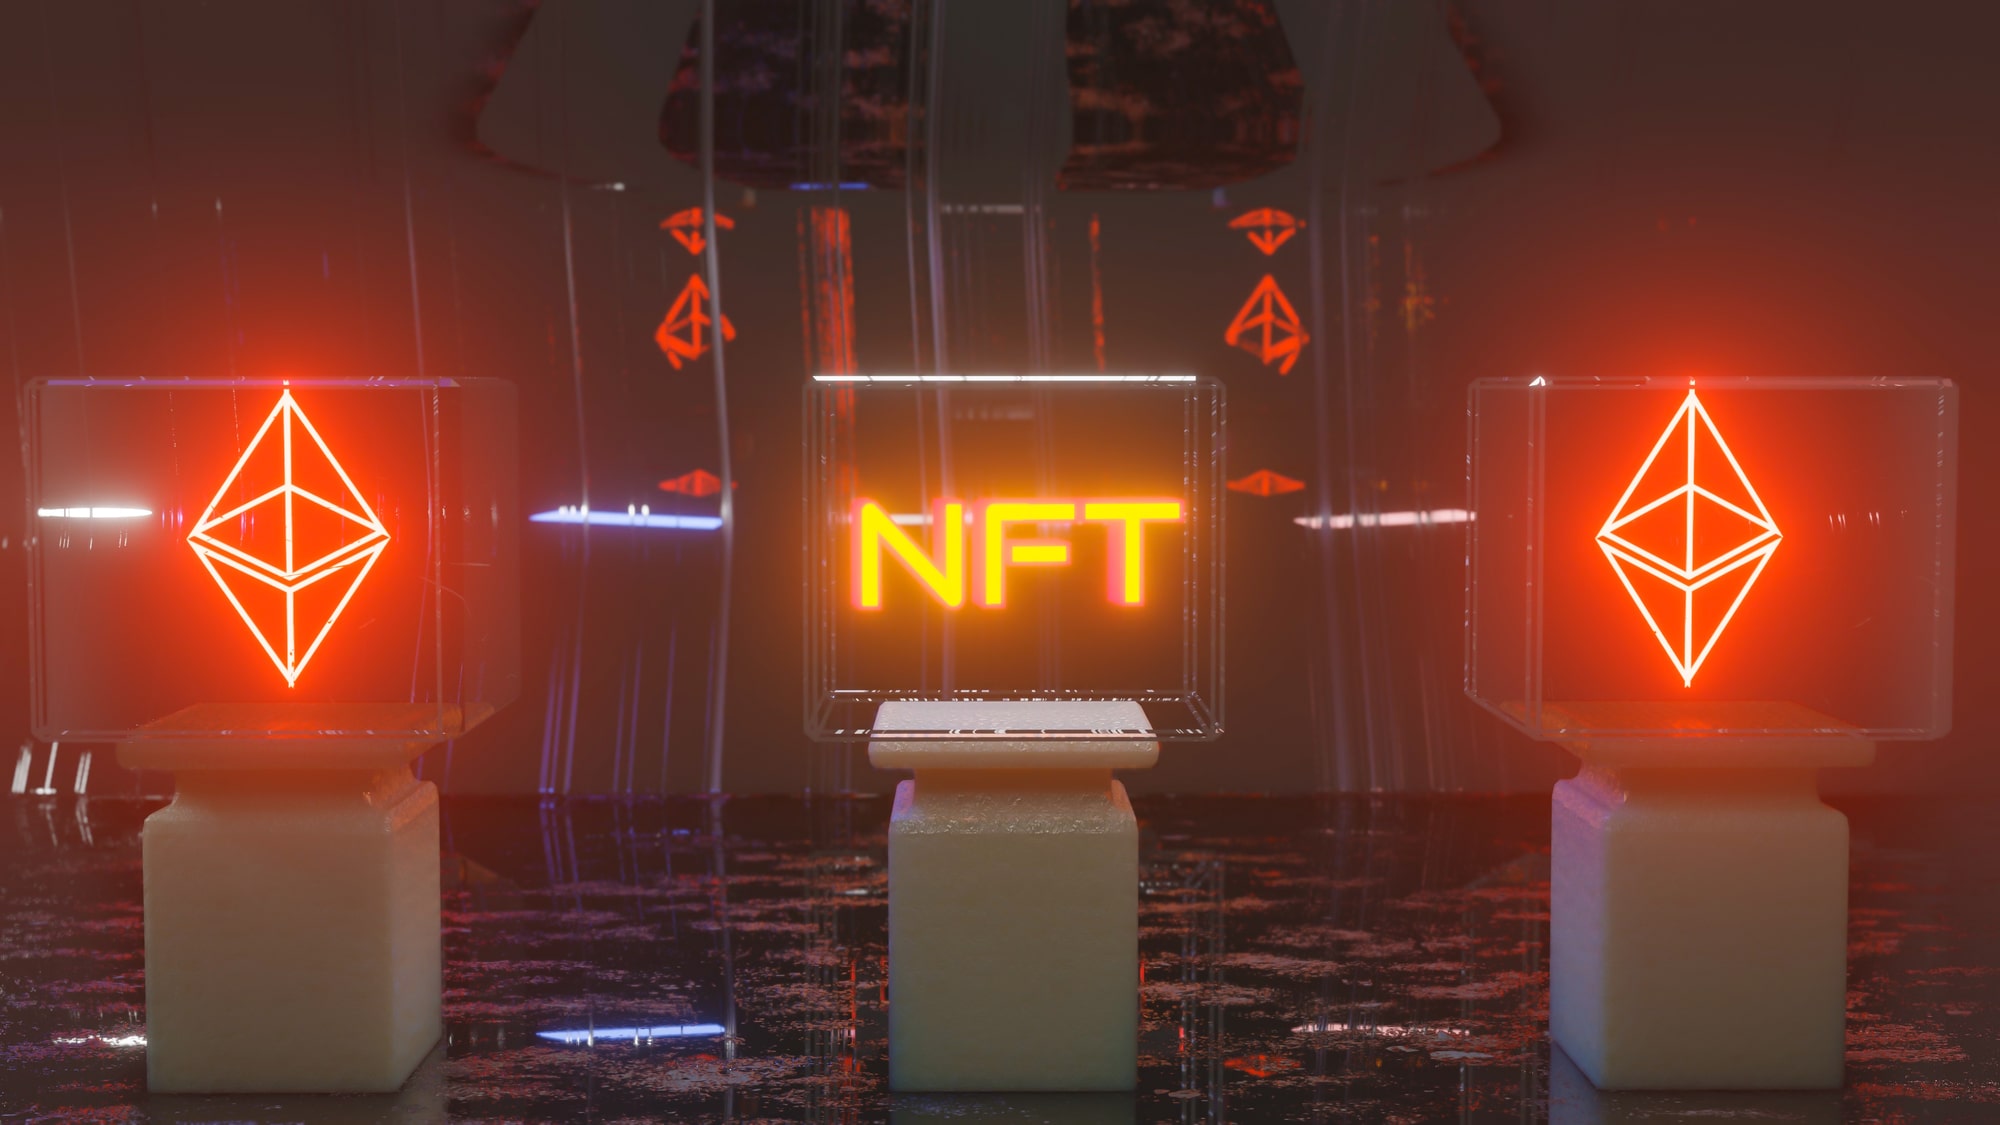 Beeple launches the next art project to sell moments in time as NFTs